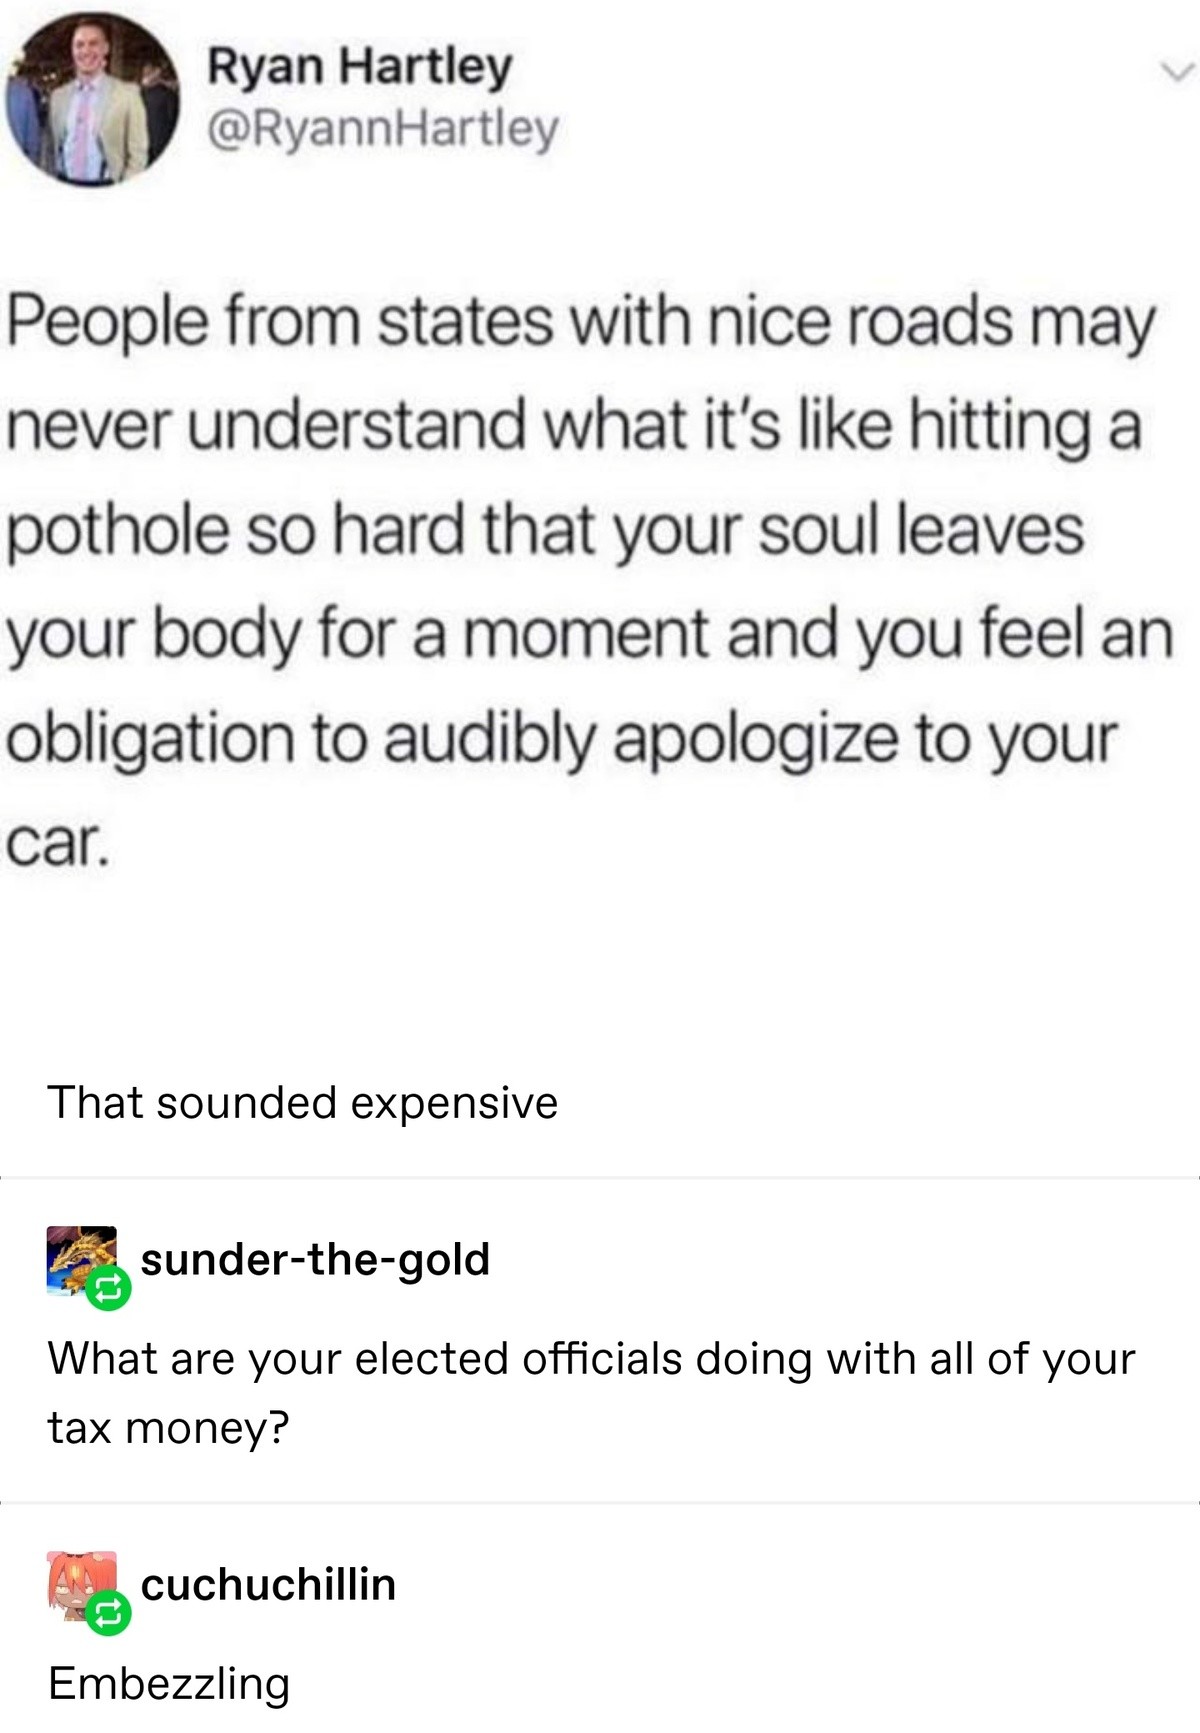 Road - Ryan Hartley Hartley People from states with nice roads may never understand what it's hitting a pothole so hard that your soul leaves your body for a moment and you feel an obligation to audibly apologize to your car. That sounded expensive sunder